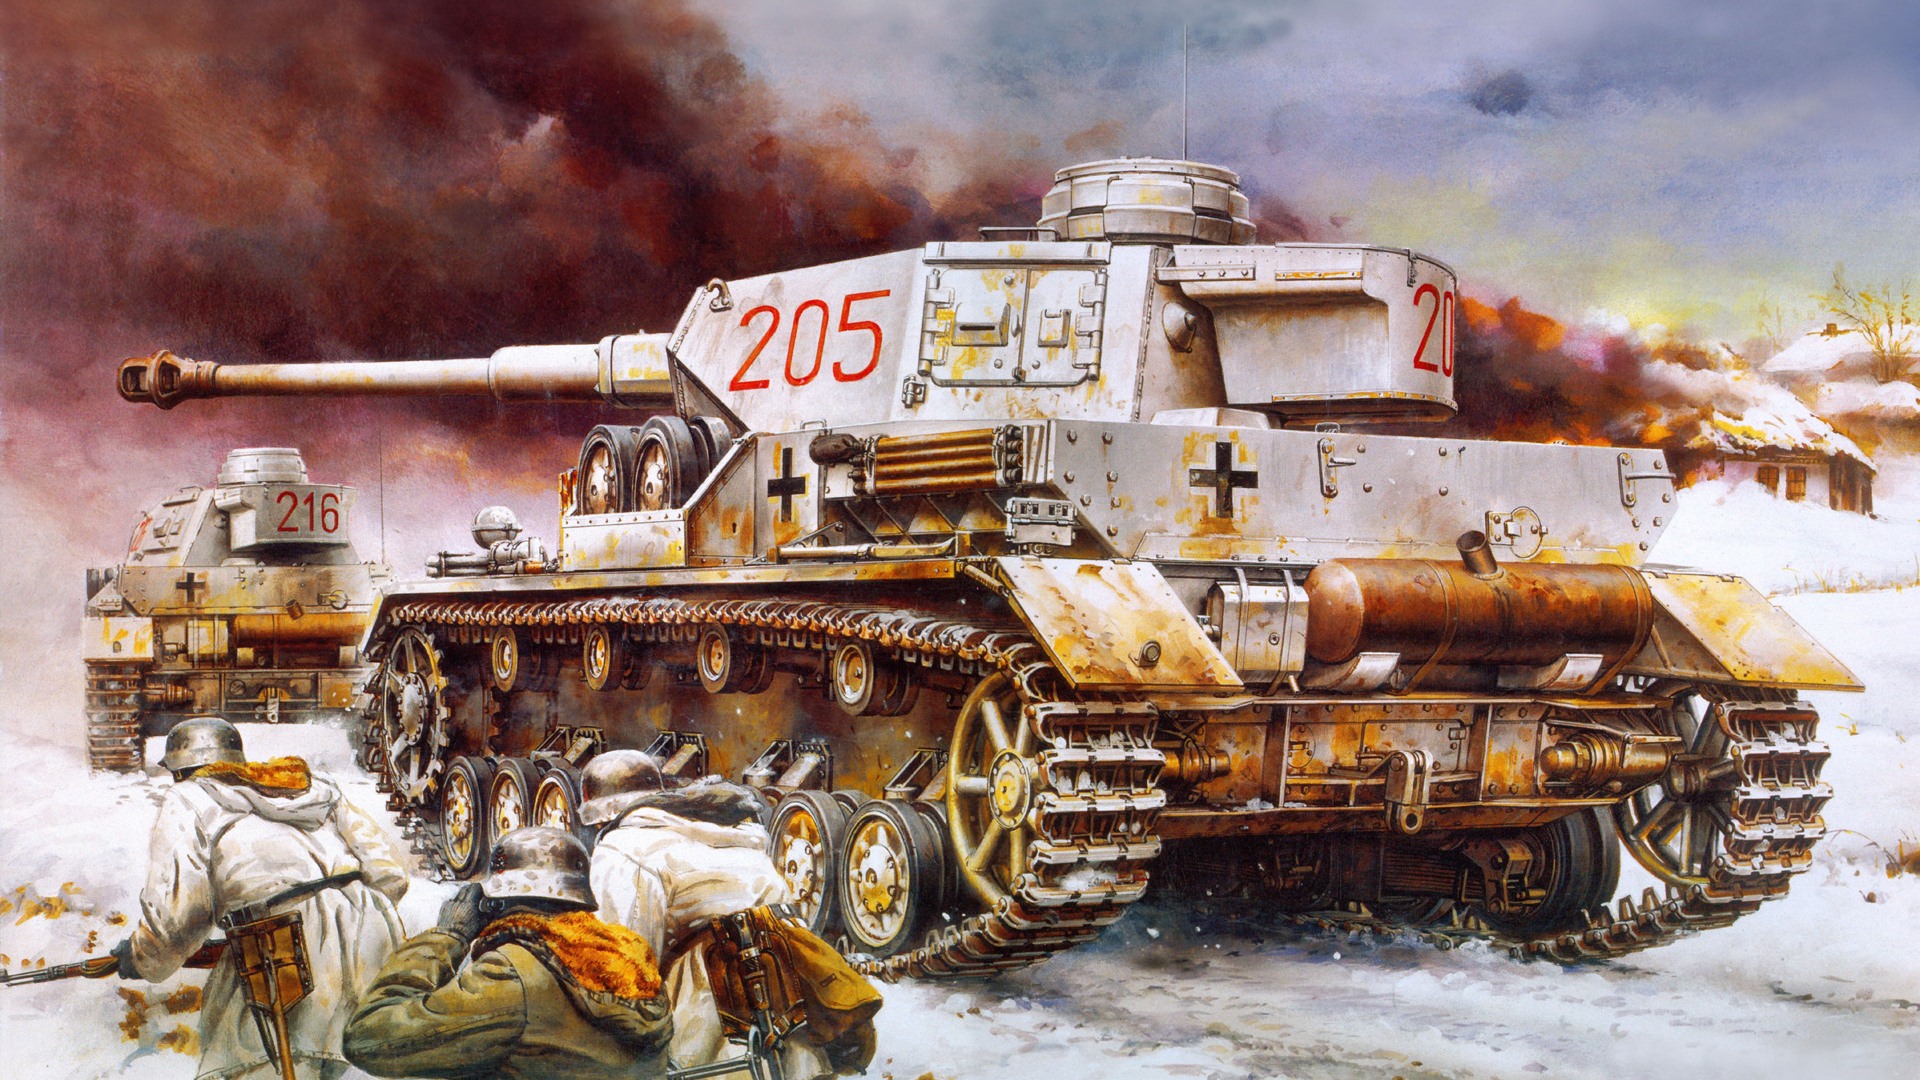 Military tanks, armored HD painting wallpapers #15 - 1920x1080